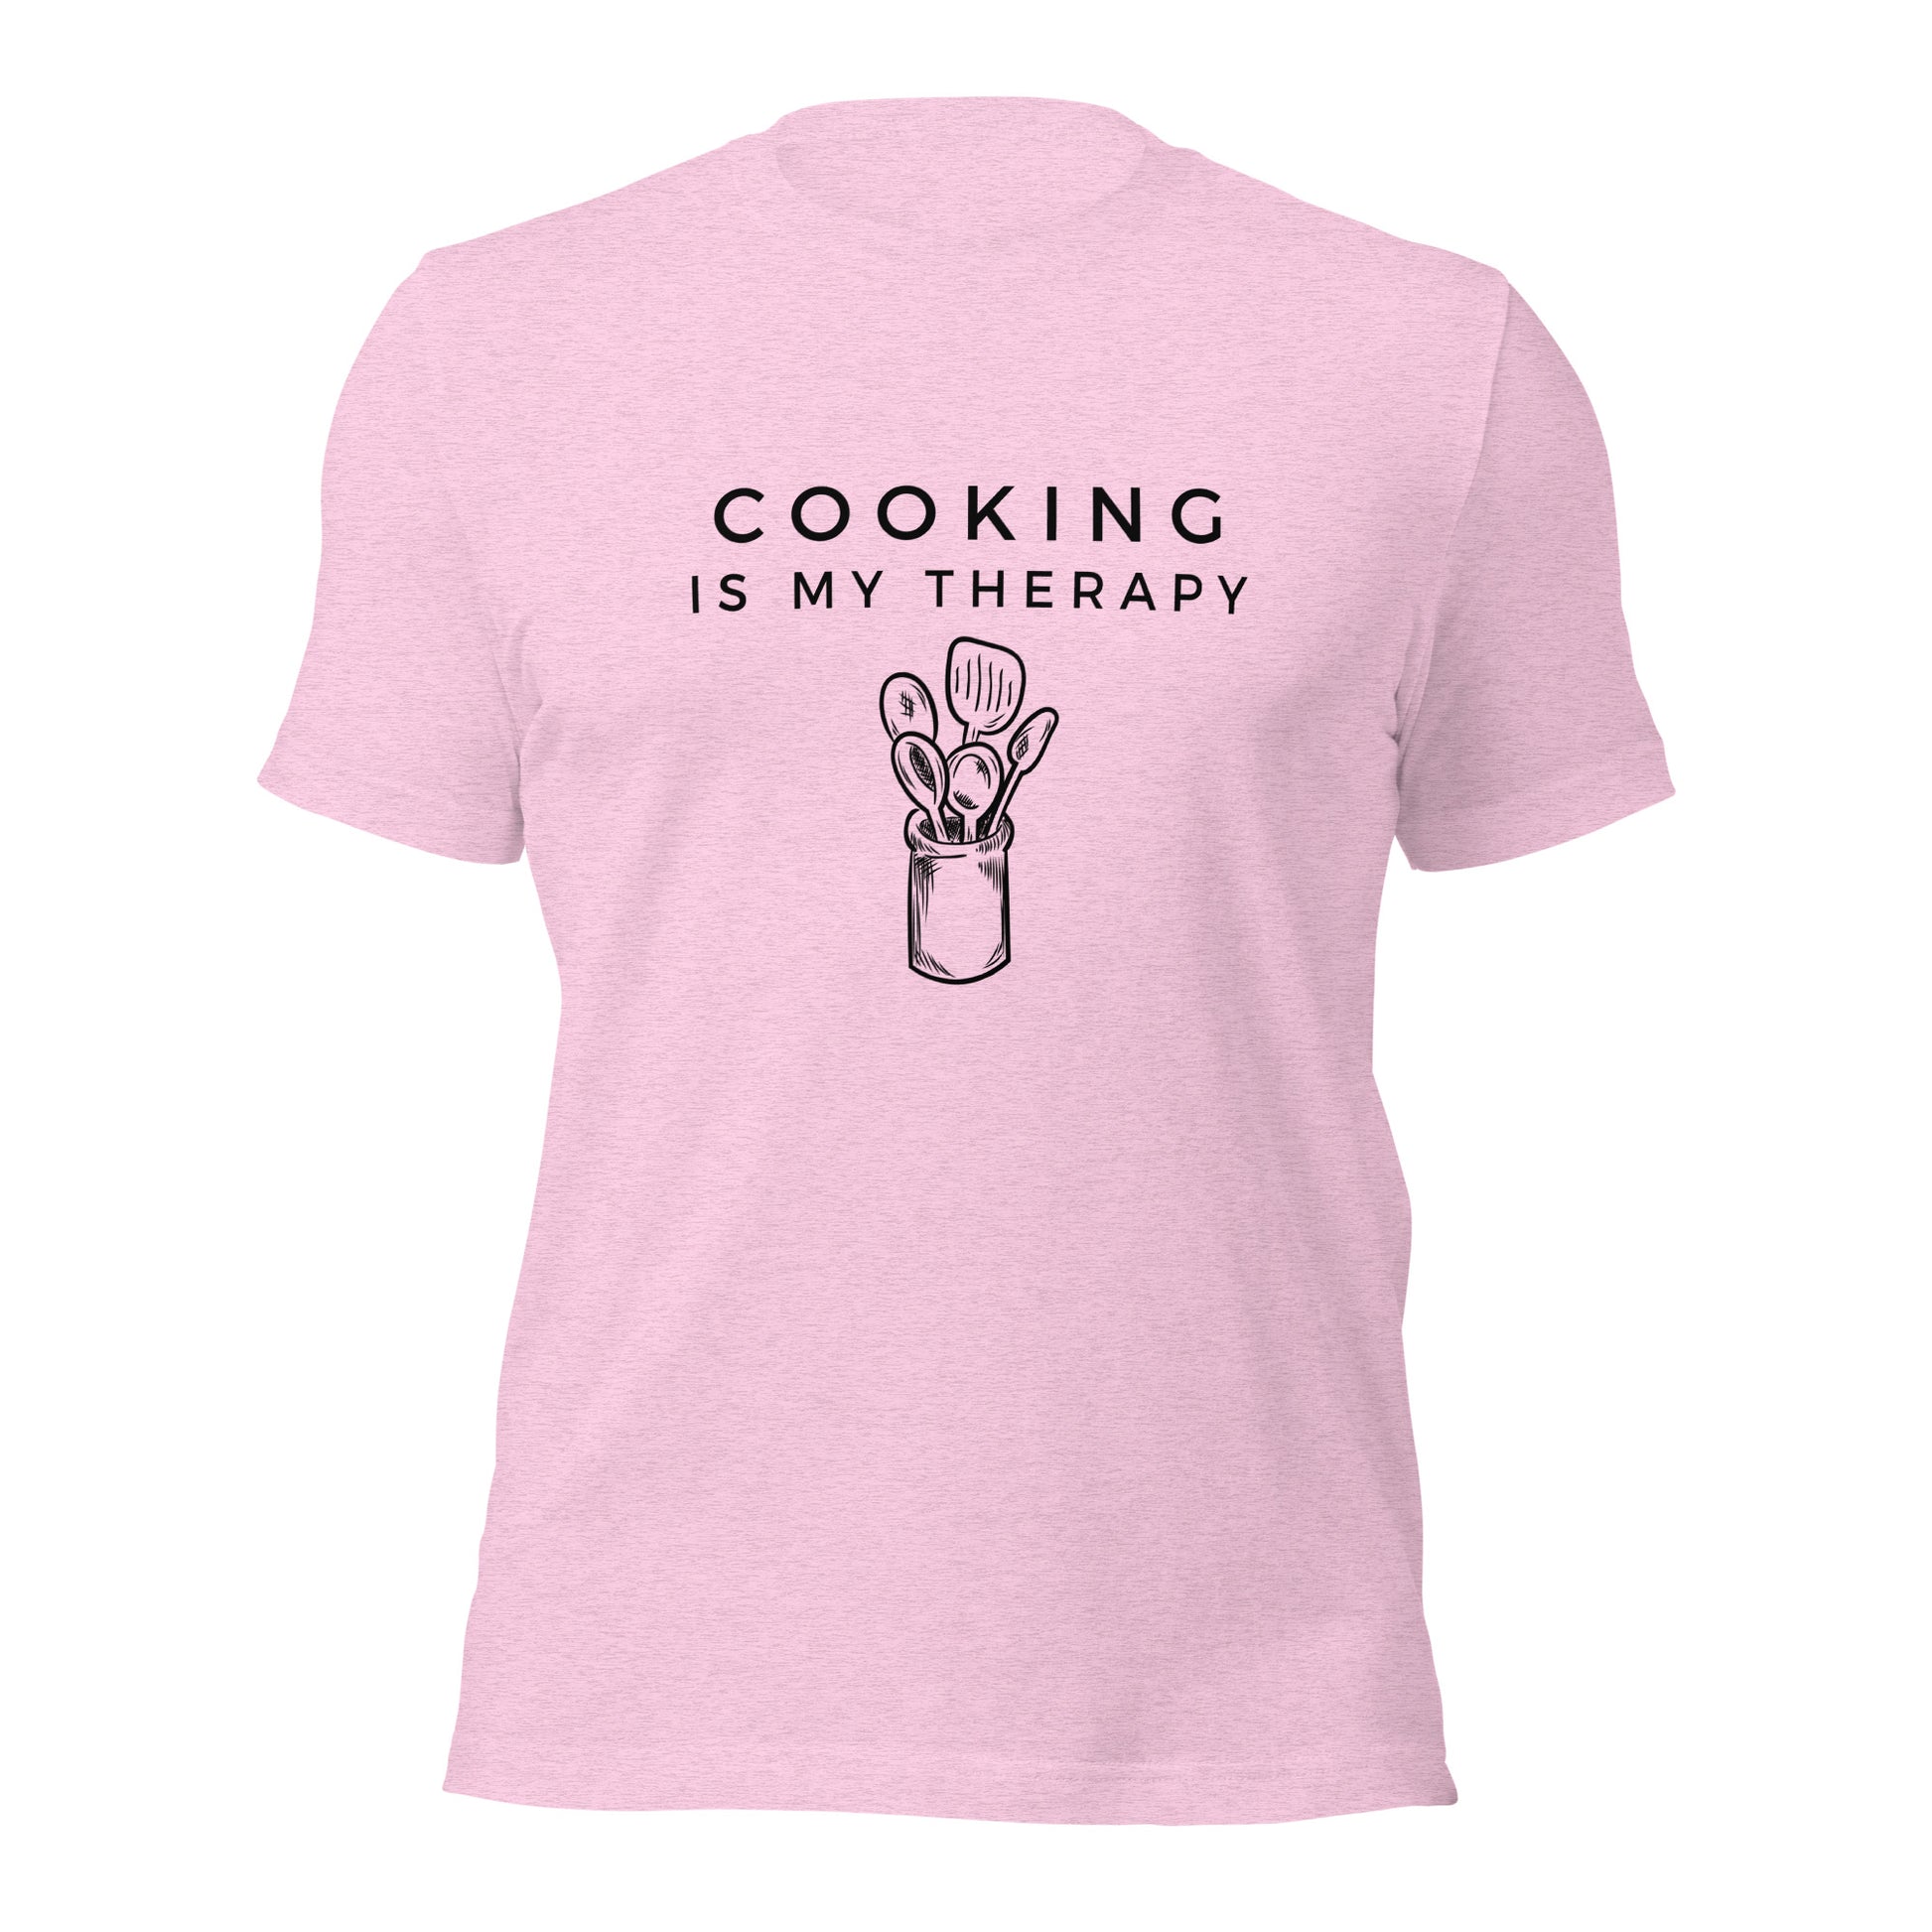 Culinary passion statement t-shirt in various sizes